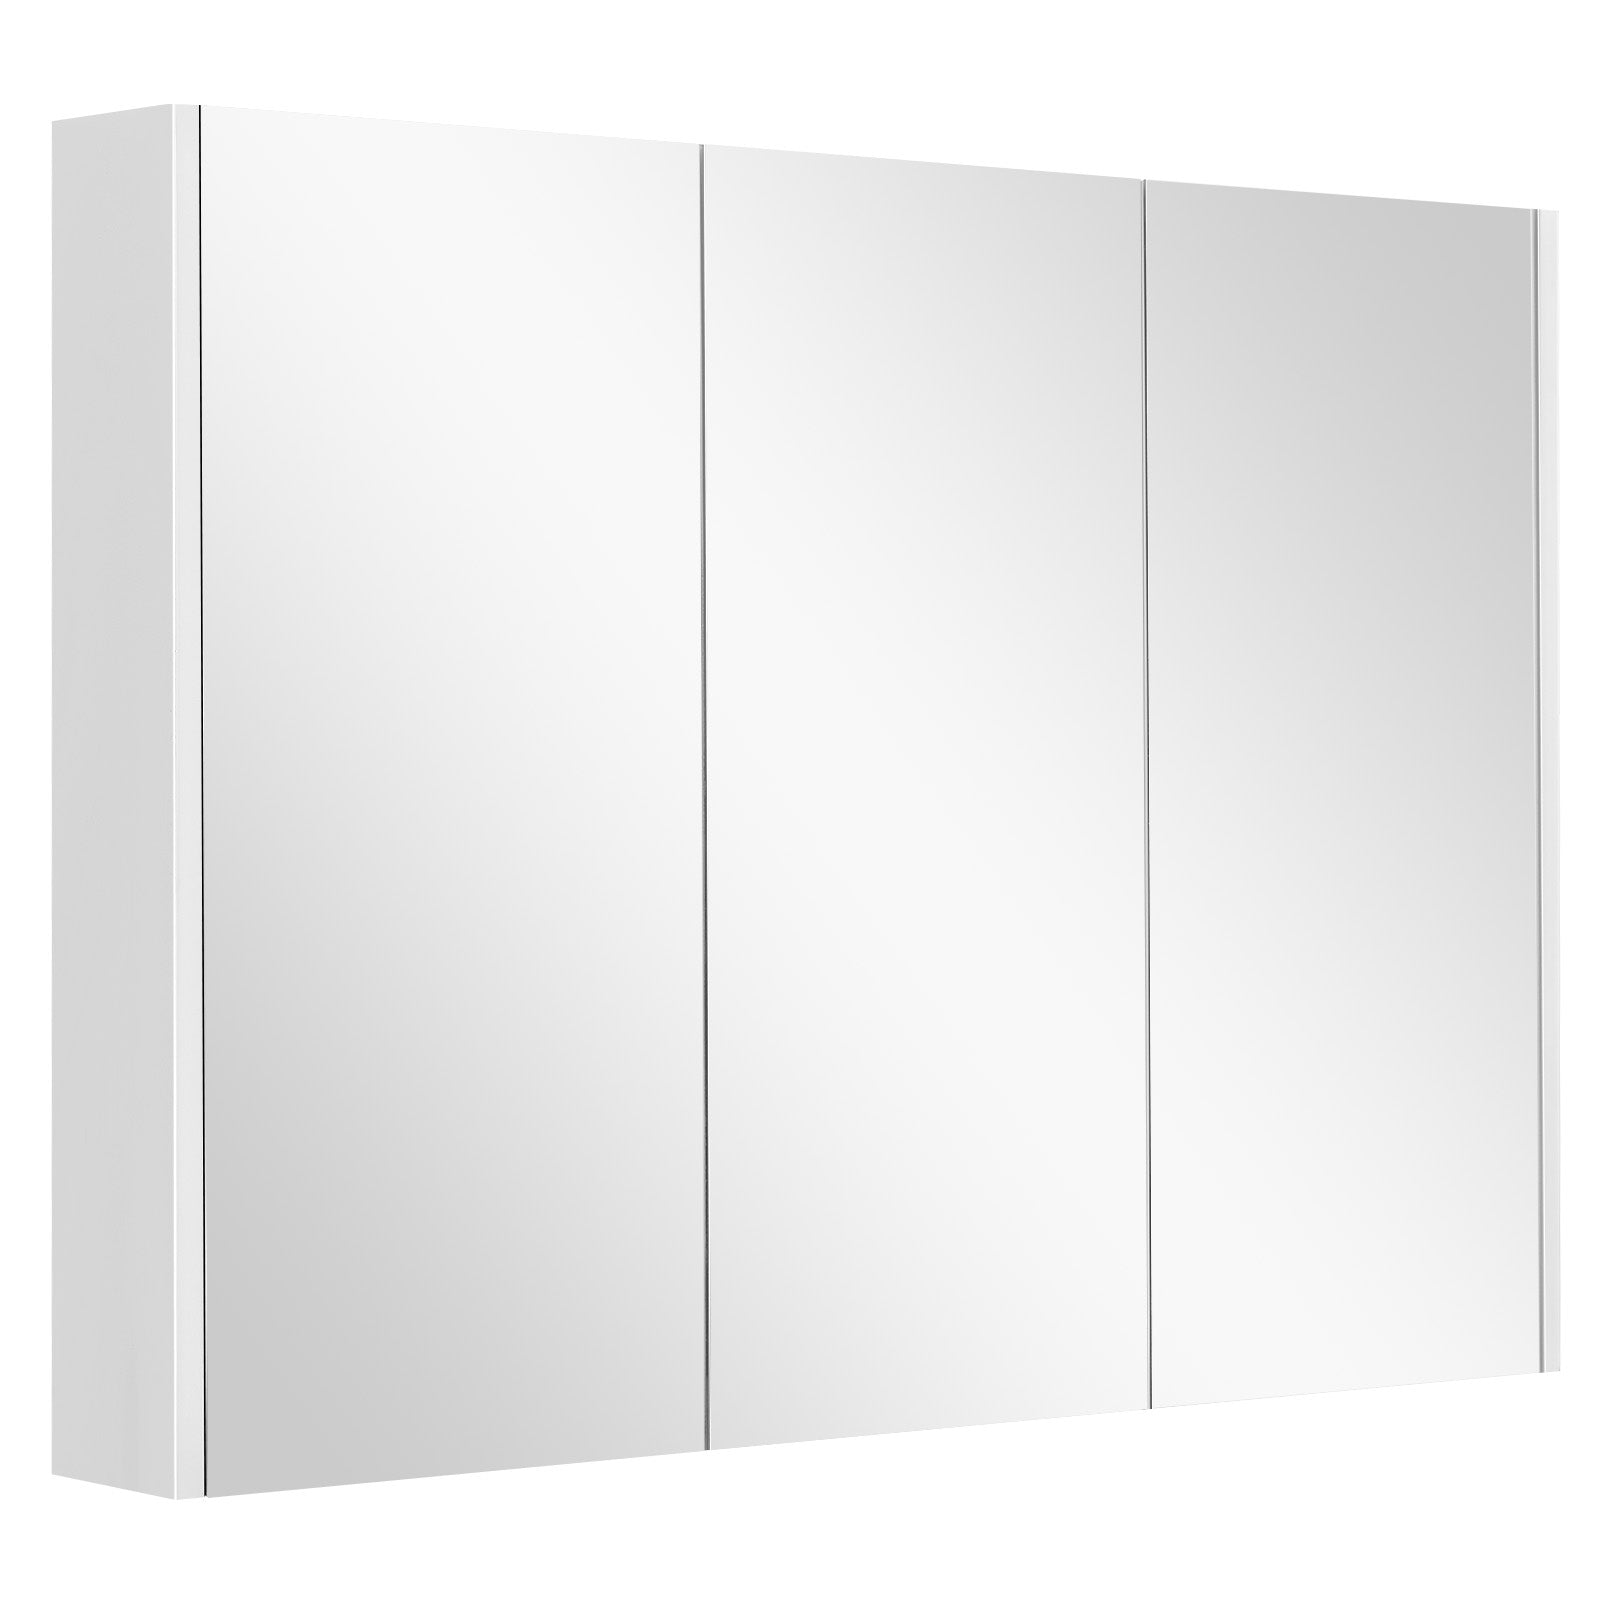 Frameless Bathroom Wall Mounted Mirror Cabinet with 3 Doors and Adjustable Shelves - Direct by Wilsons Home Store